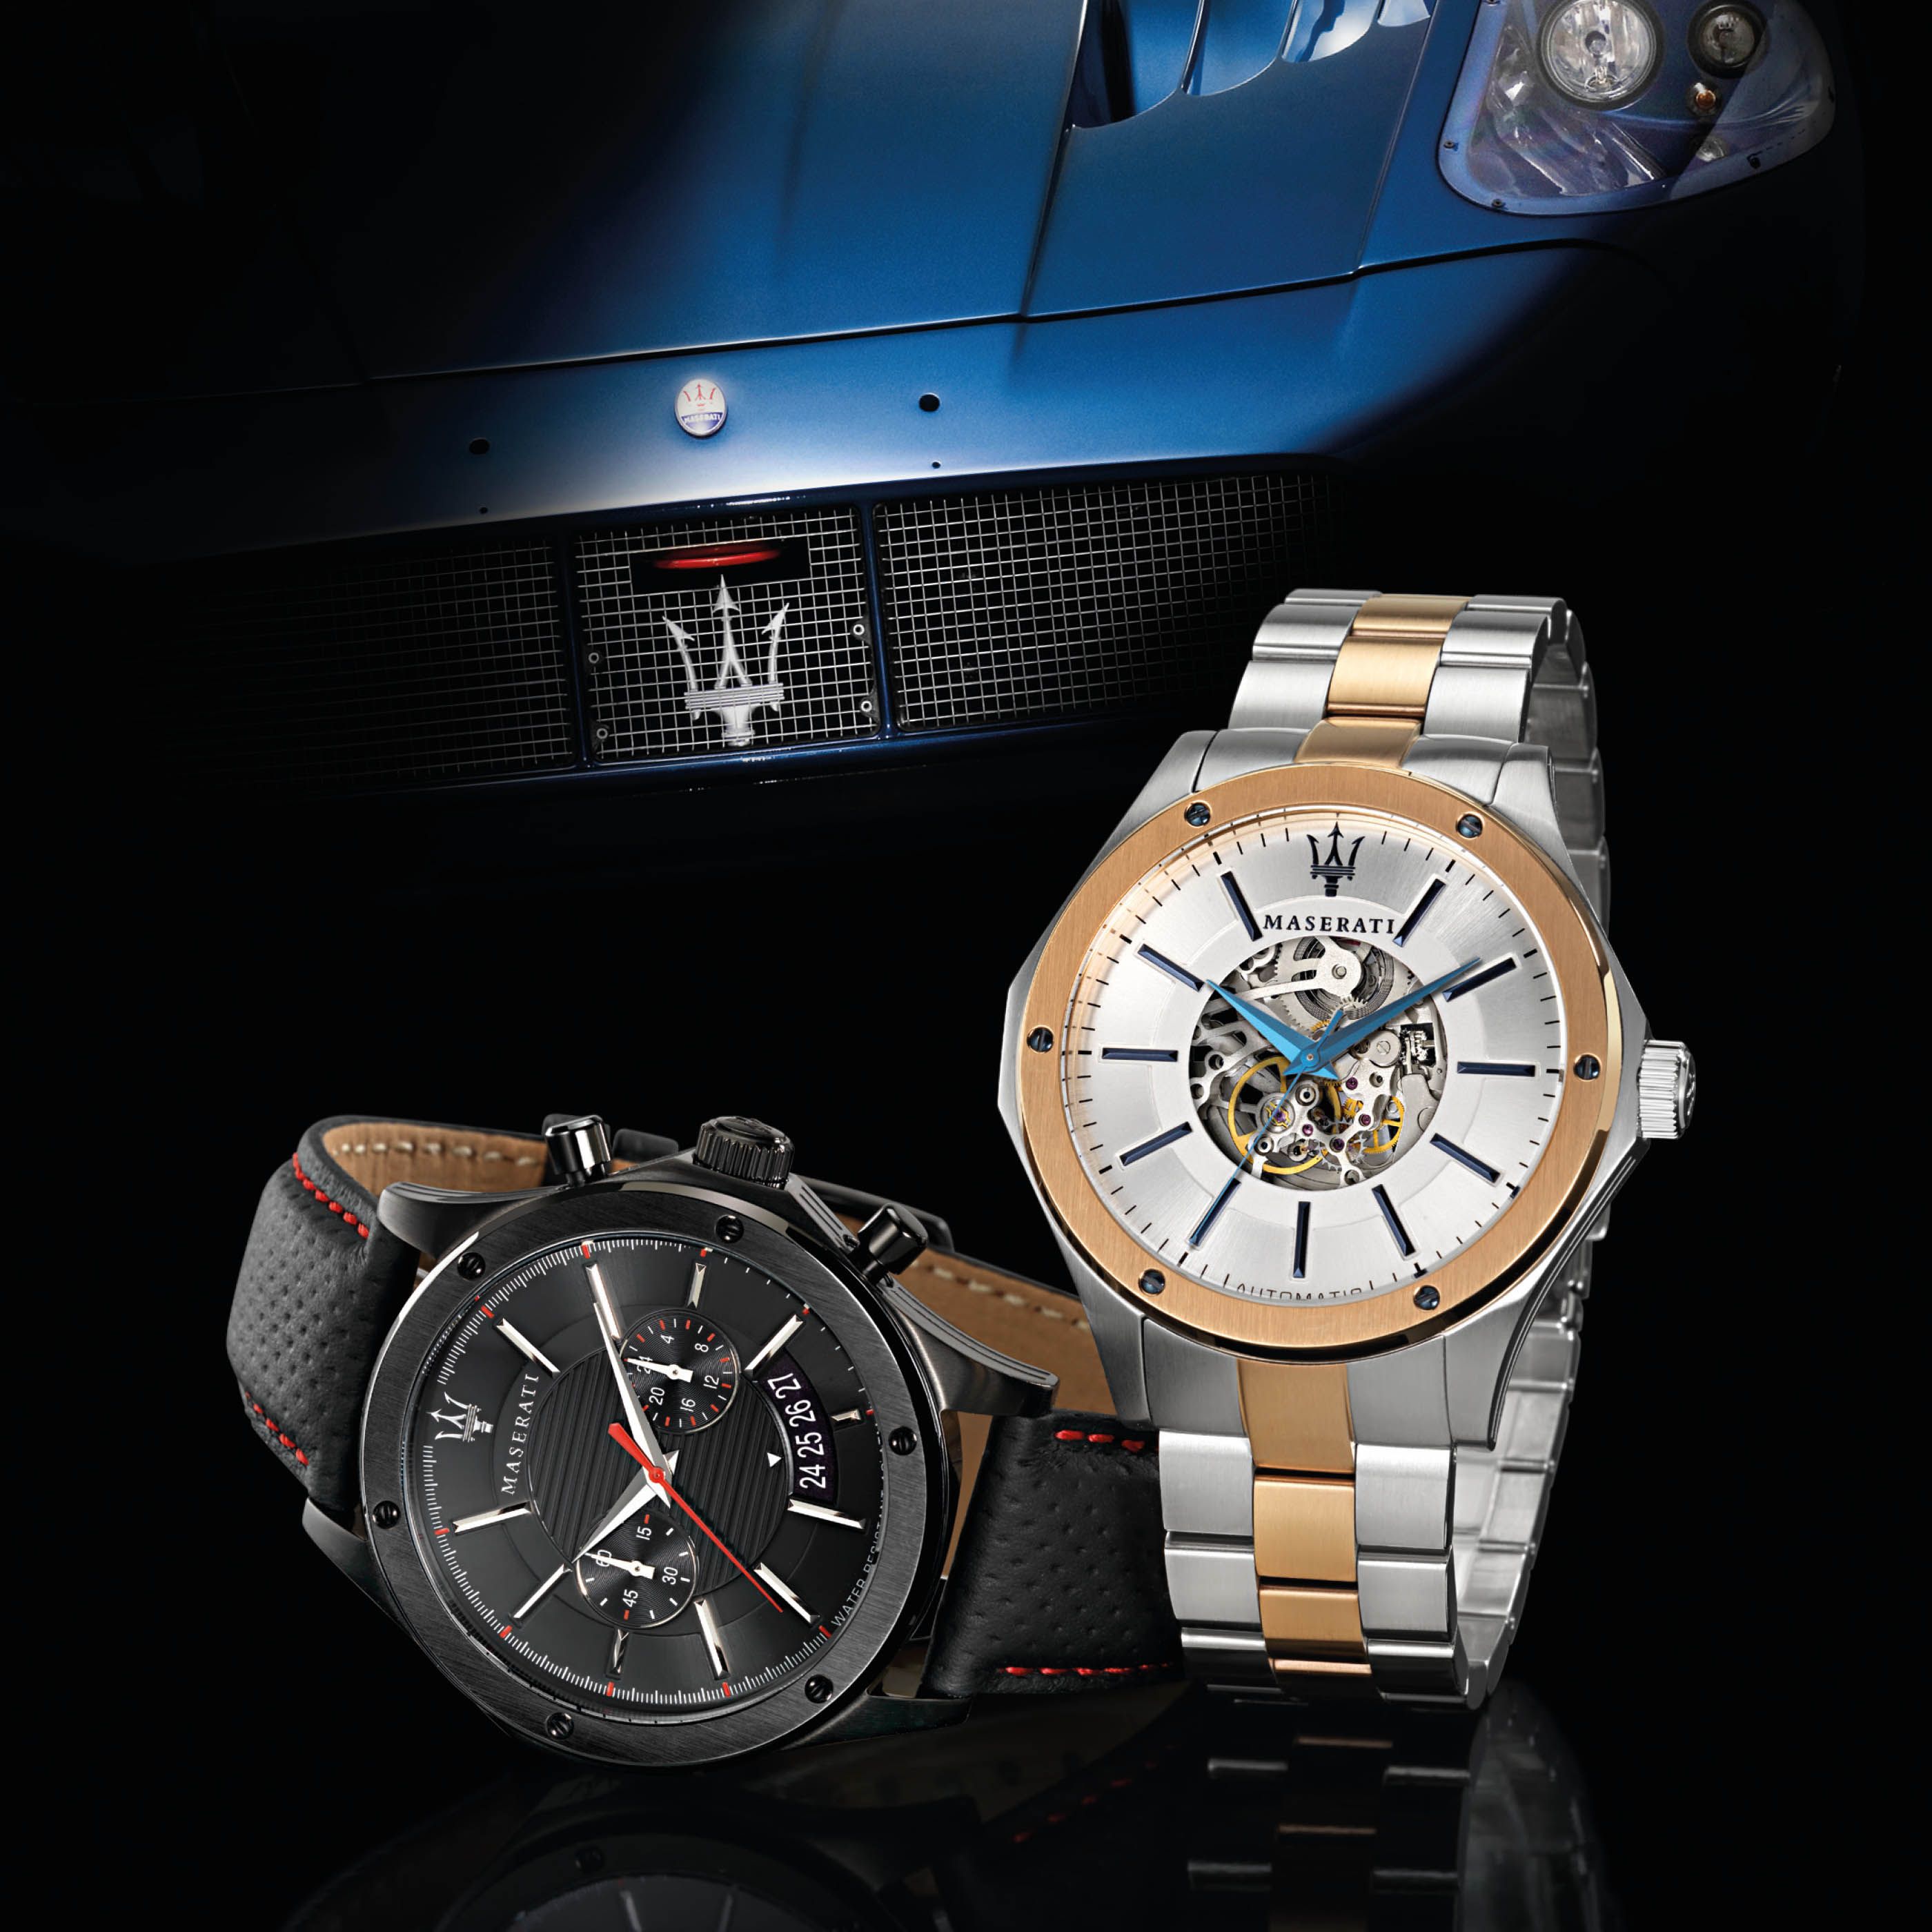 Maserati Watch Boutiques within Luxury Car Dealerships